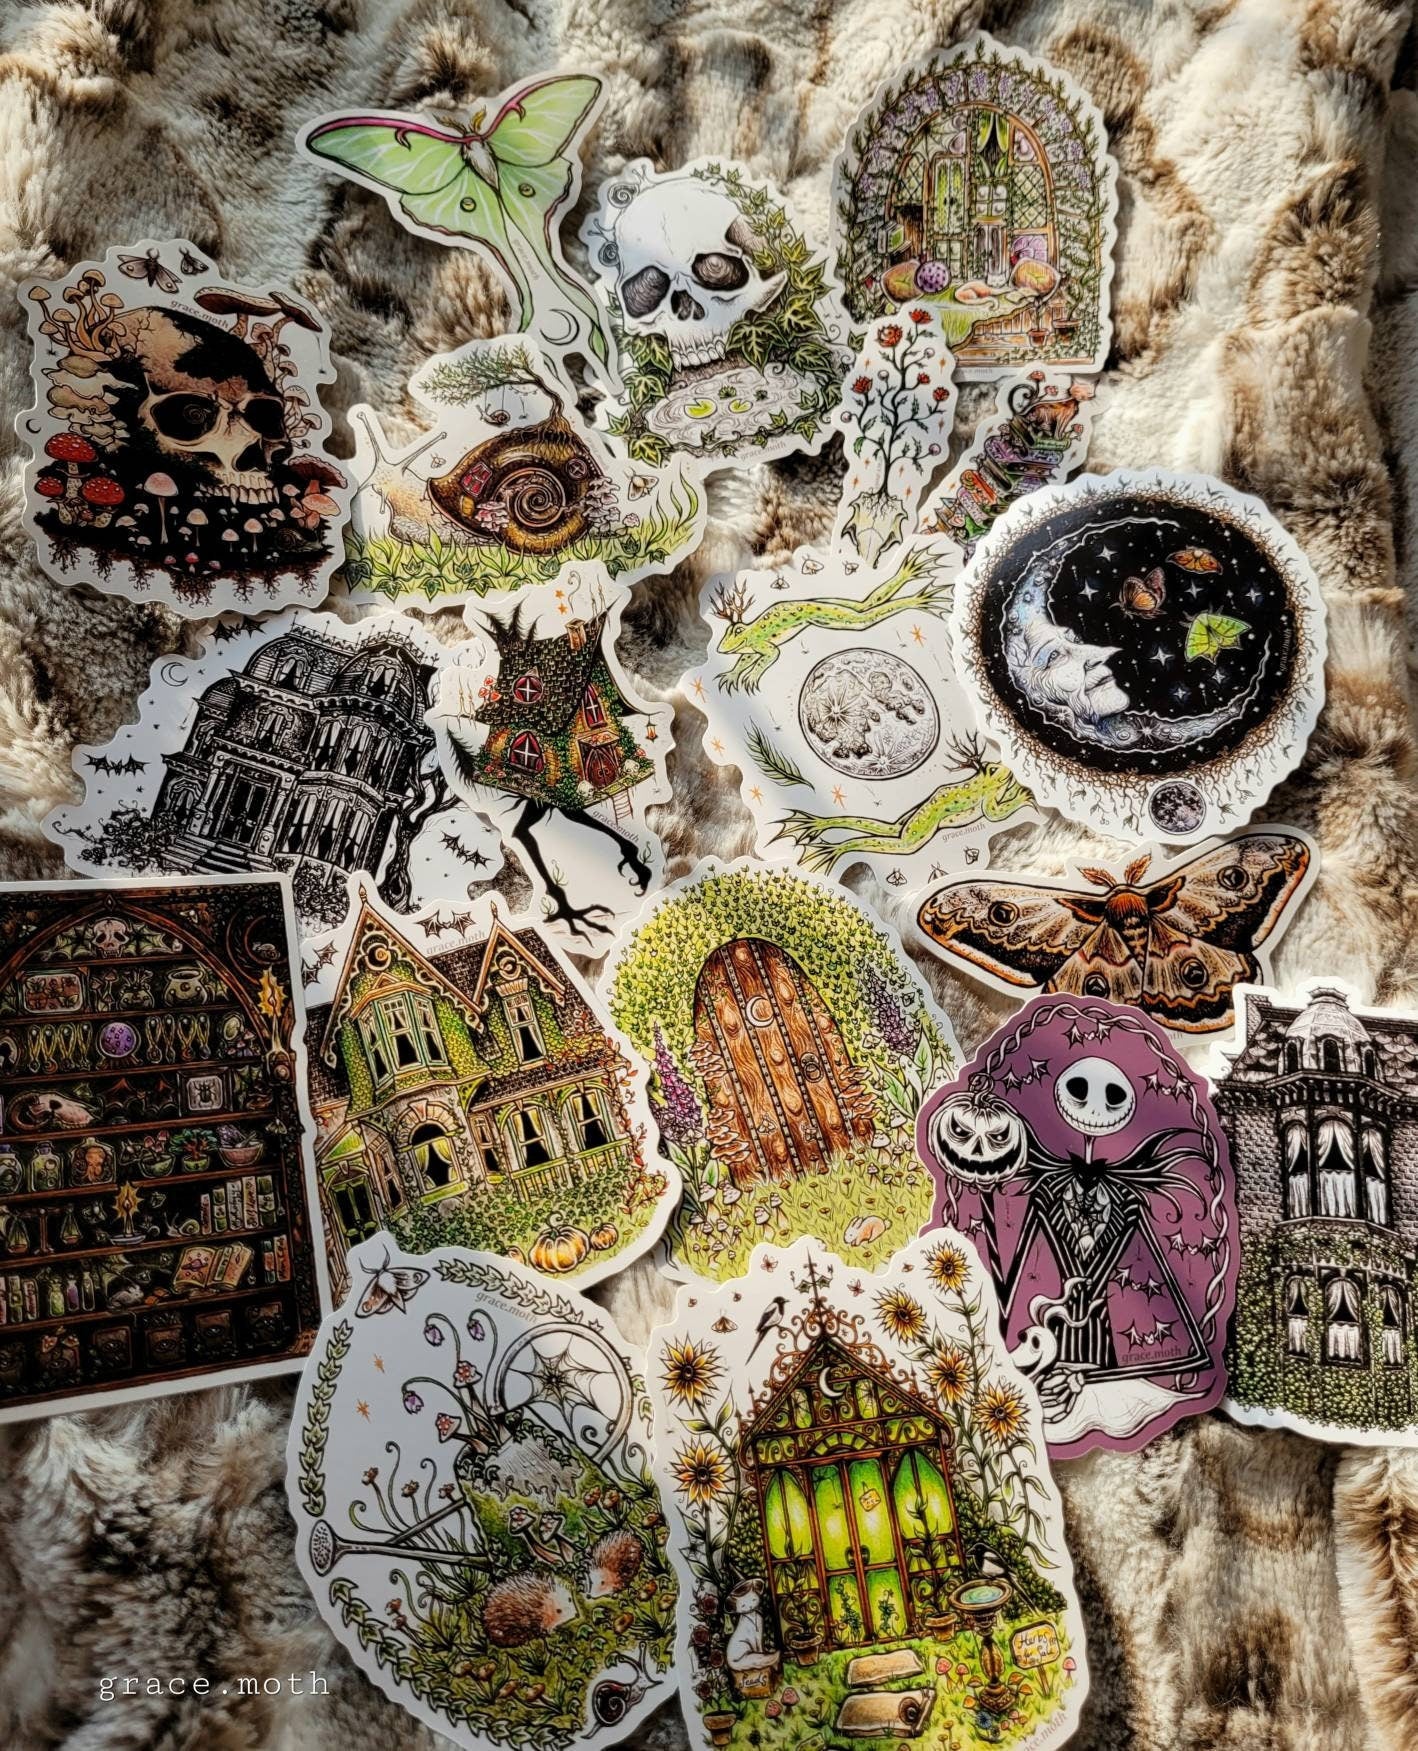 Creepy House - Vinyl Sticker 10cm by 9cm - Illustrated by Grace moth. Haunted victorian house, ink sketch, gothic, pen and ink, bats, spooky